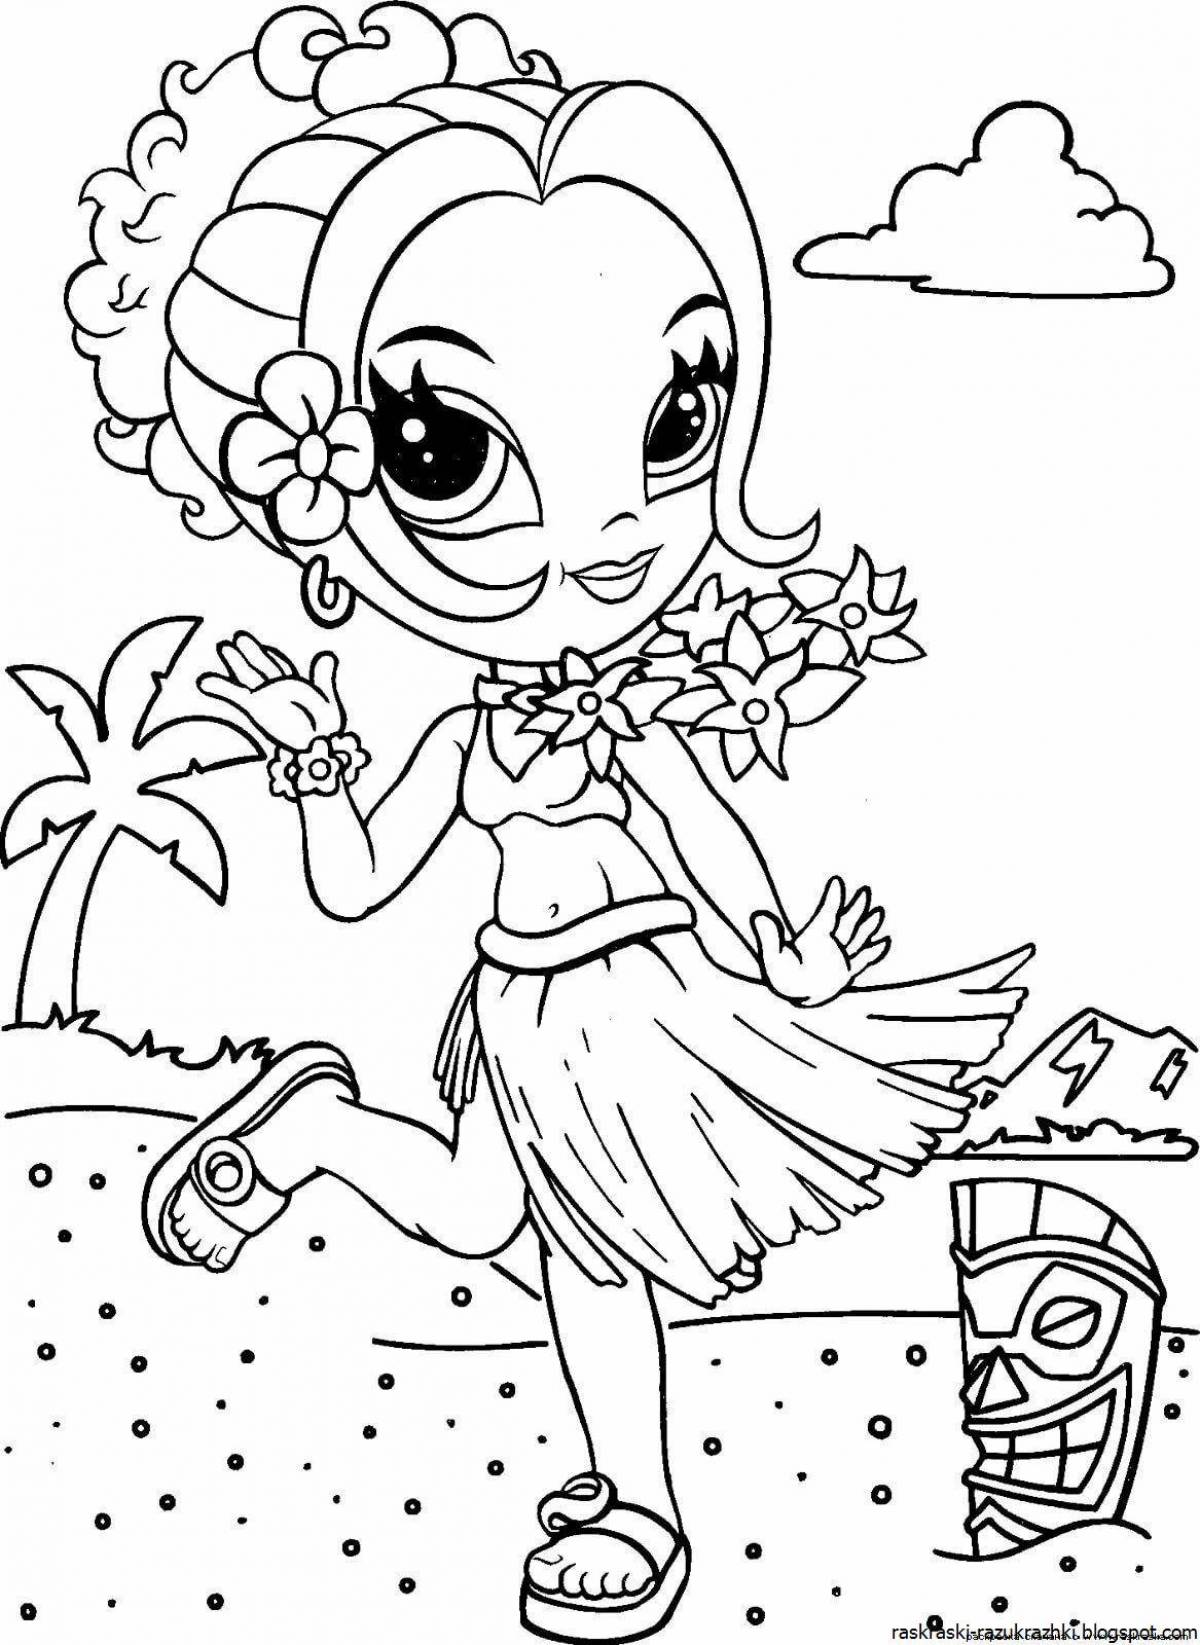 Inspirational coloring book for girls